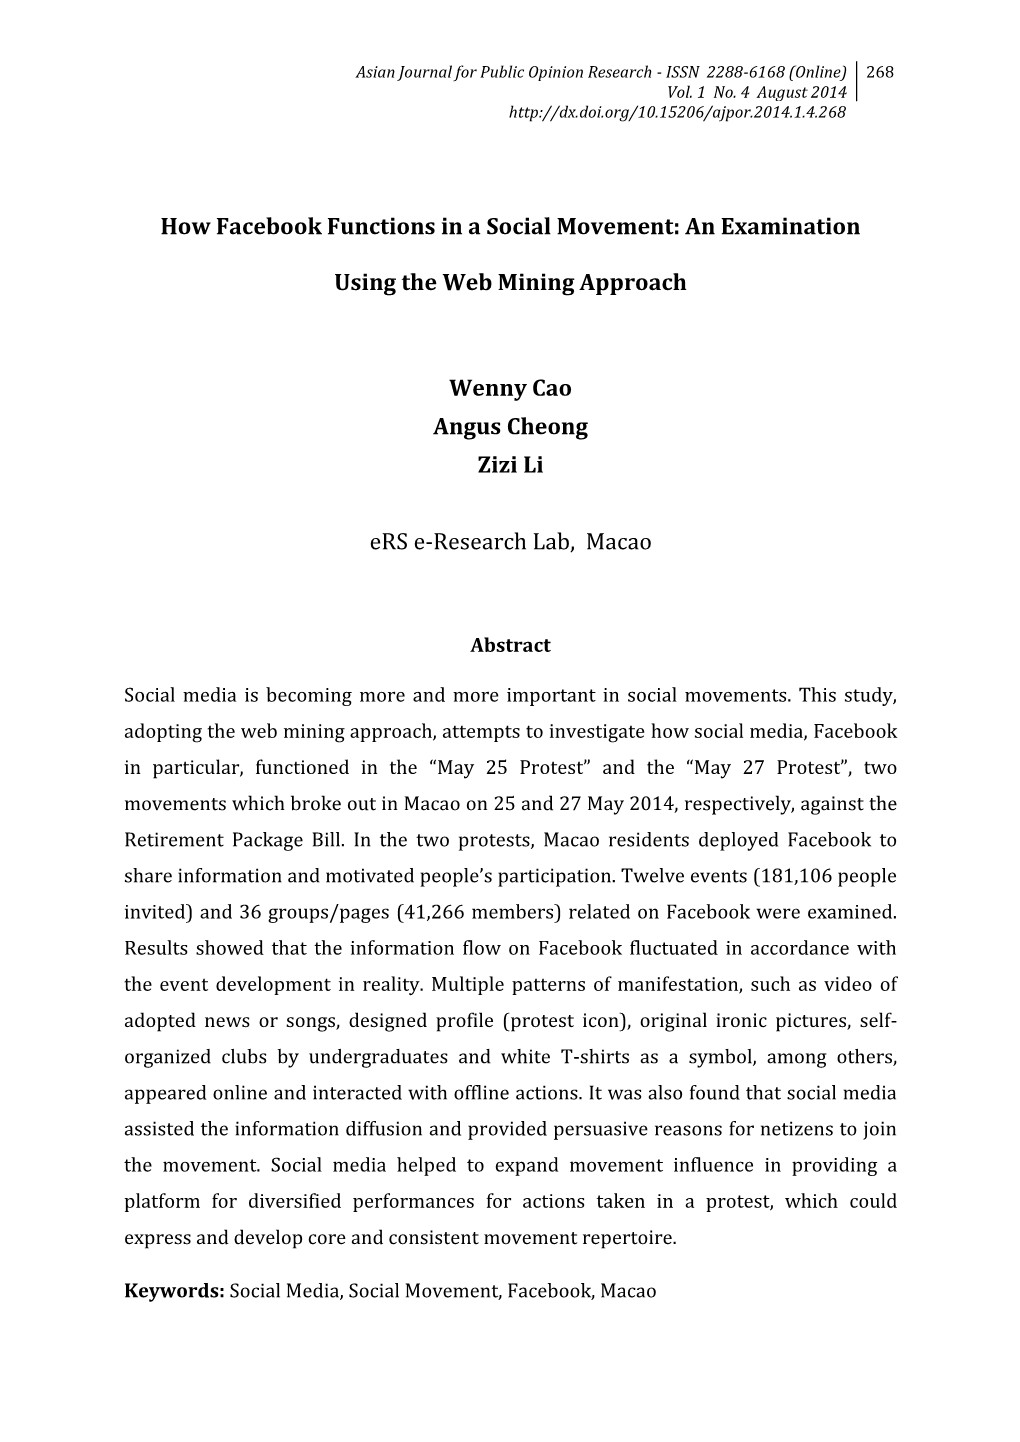 How Facebook Functions in a Social Movement: an Examination Using